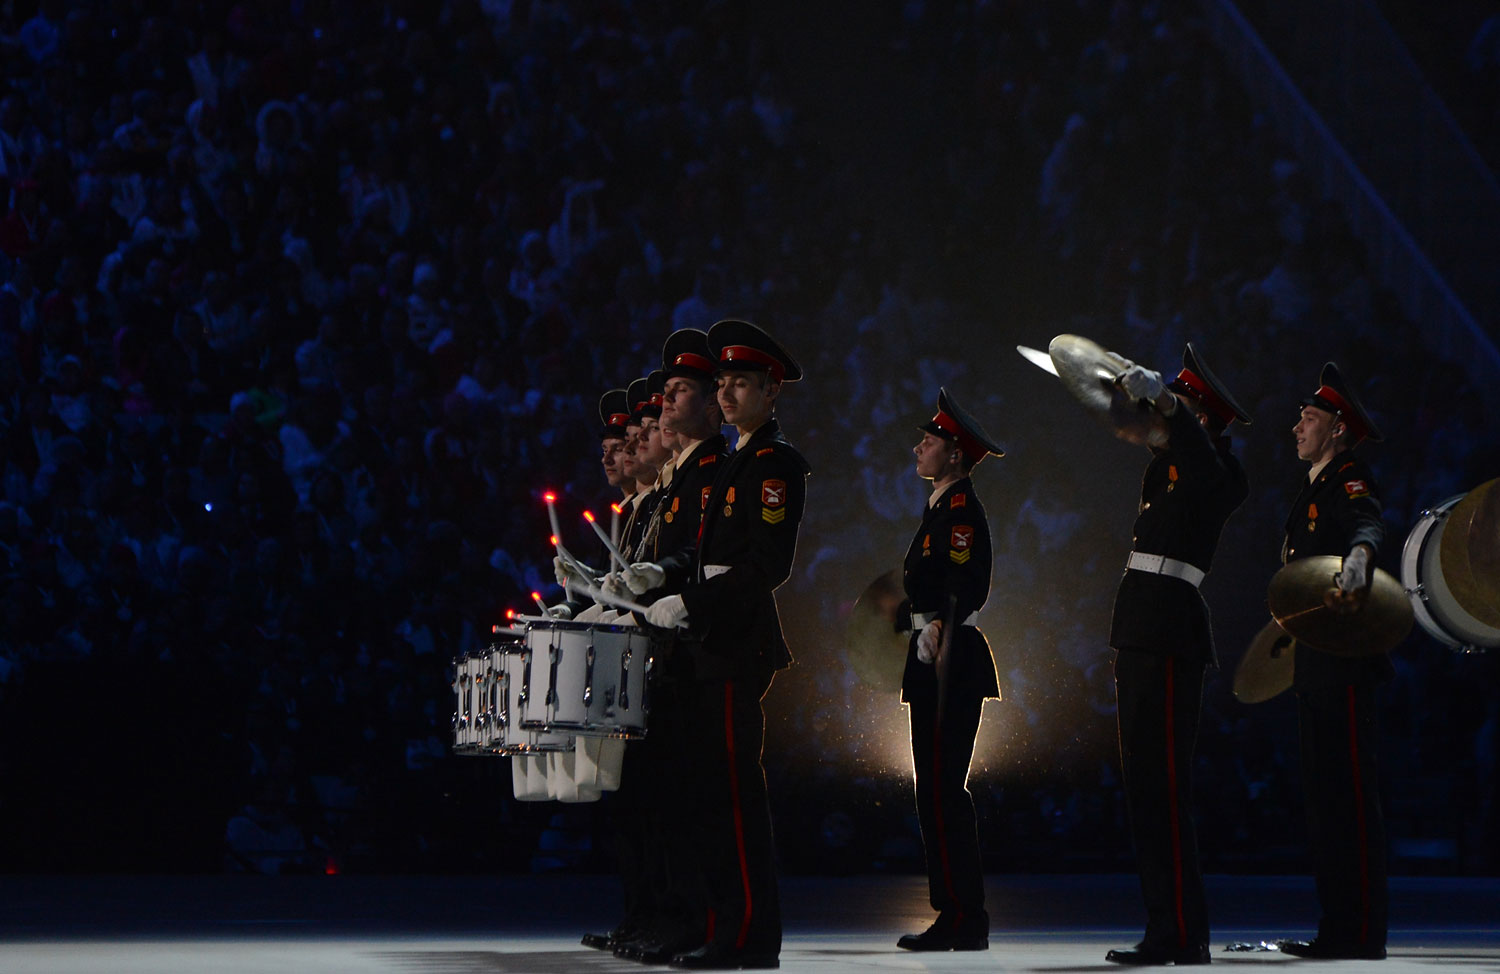 A Russian military drum band performs.